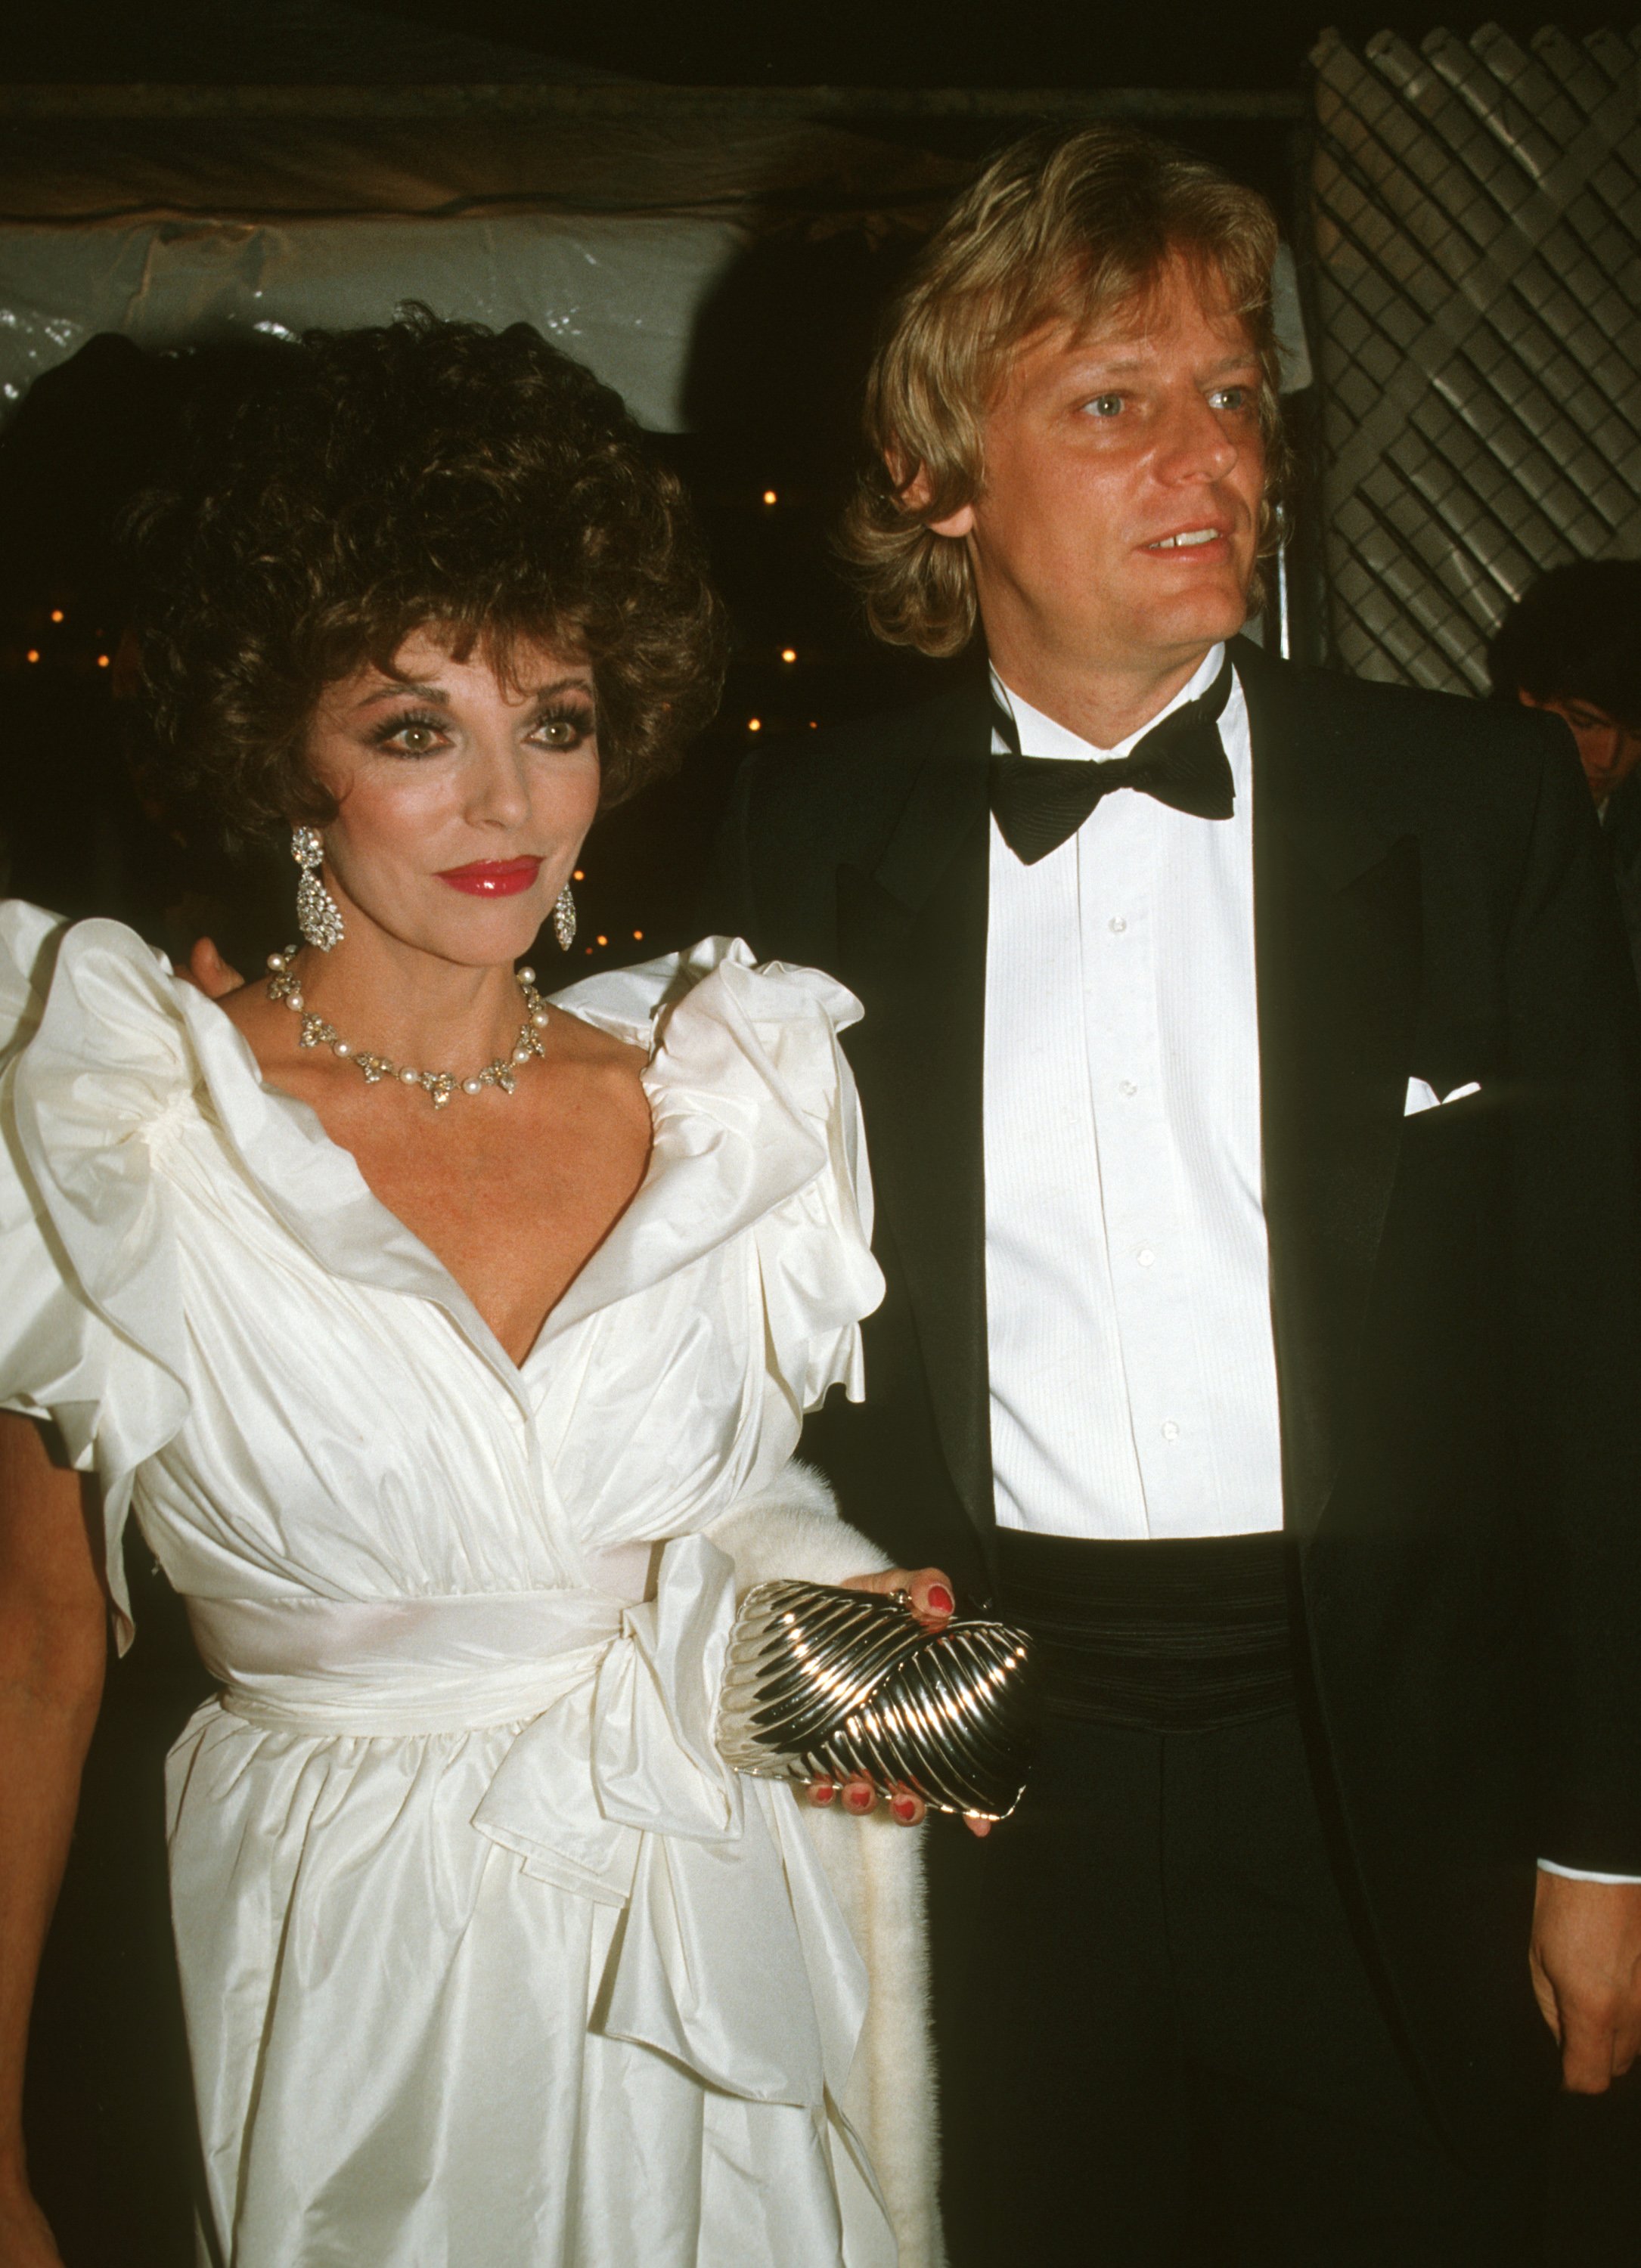 Joan Collins and Peter Holm during Variety Arts Club Celebrity Tribute to Lucille Ball at NBC TV Studios in Burbank, California. | Source: Getty Images